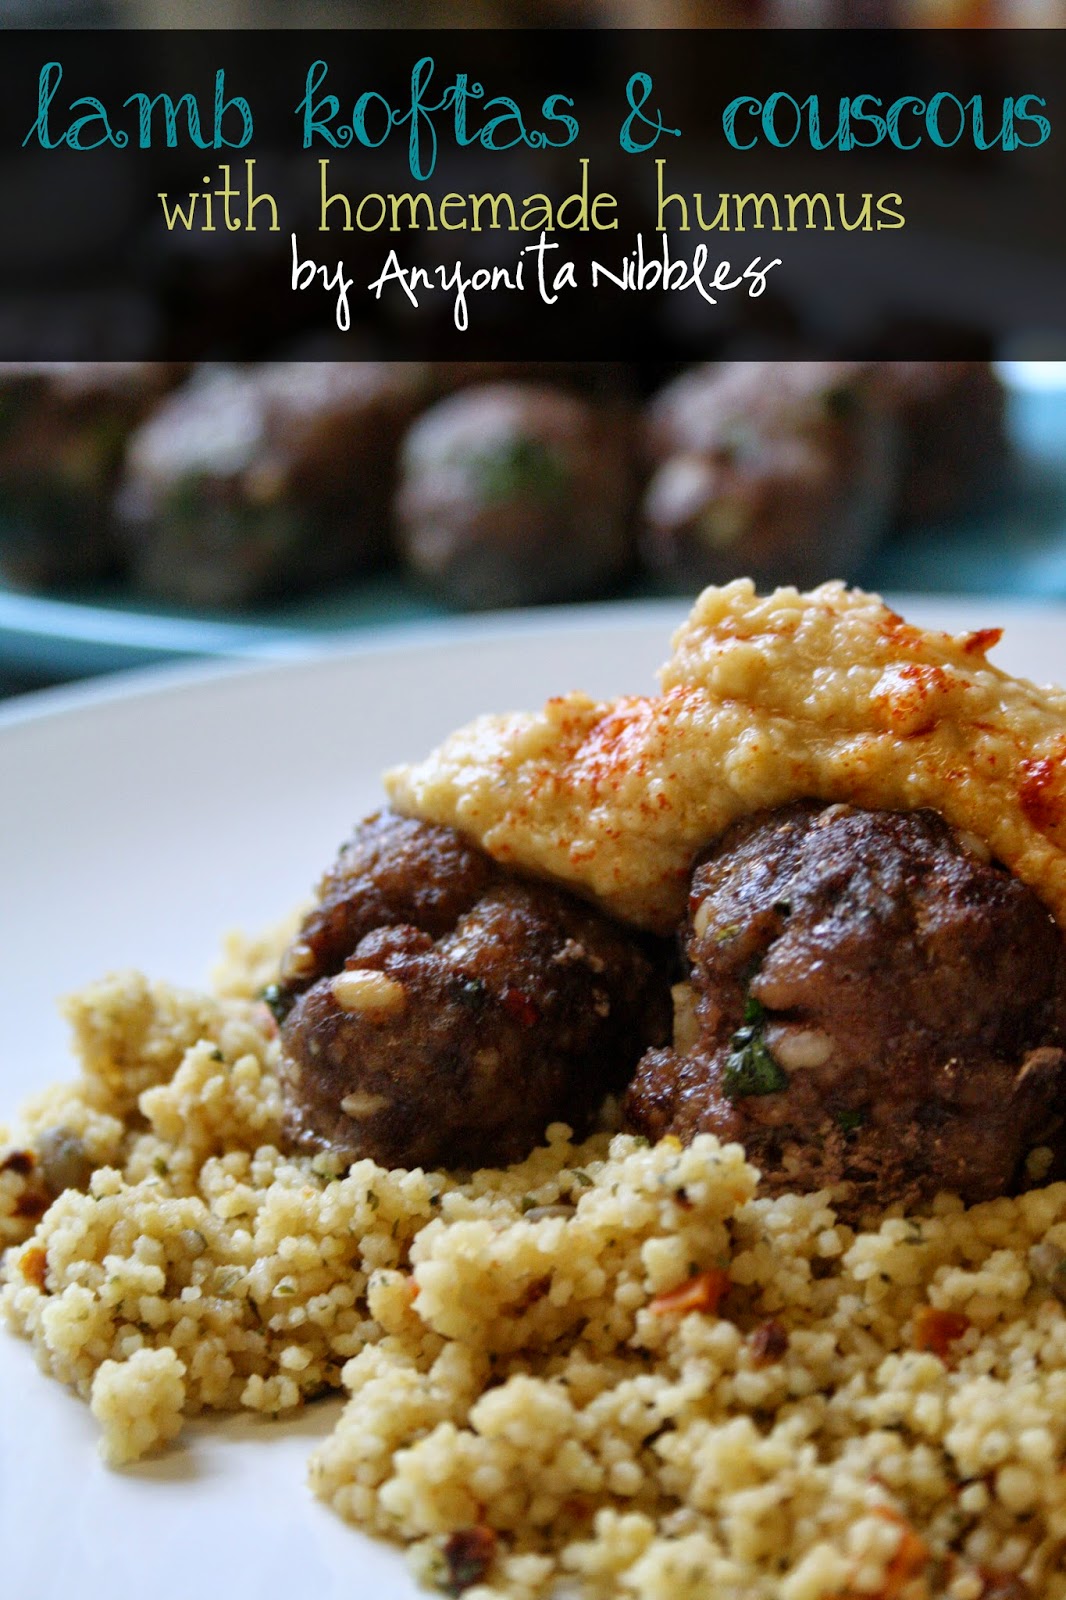 With warm Middle Eastern spices, these lamb koftas are gluten free, hearty & filling. From Anyonita Nibbles